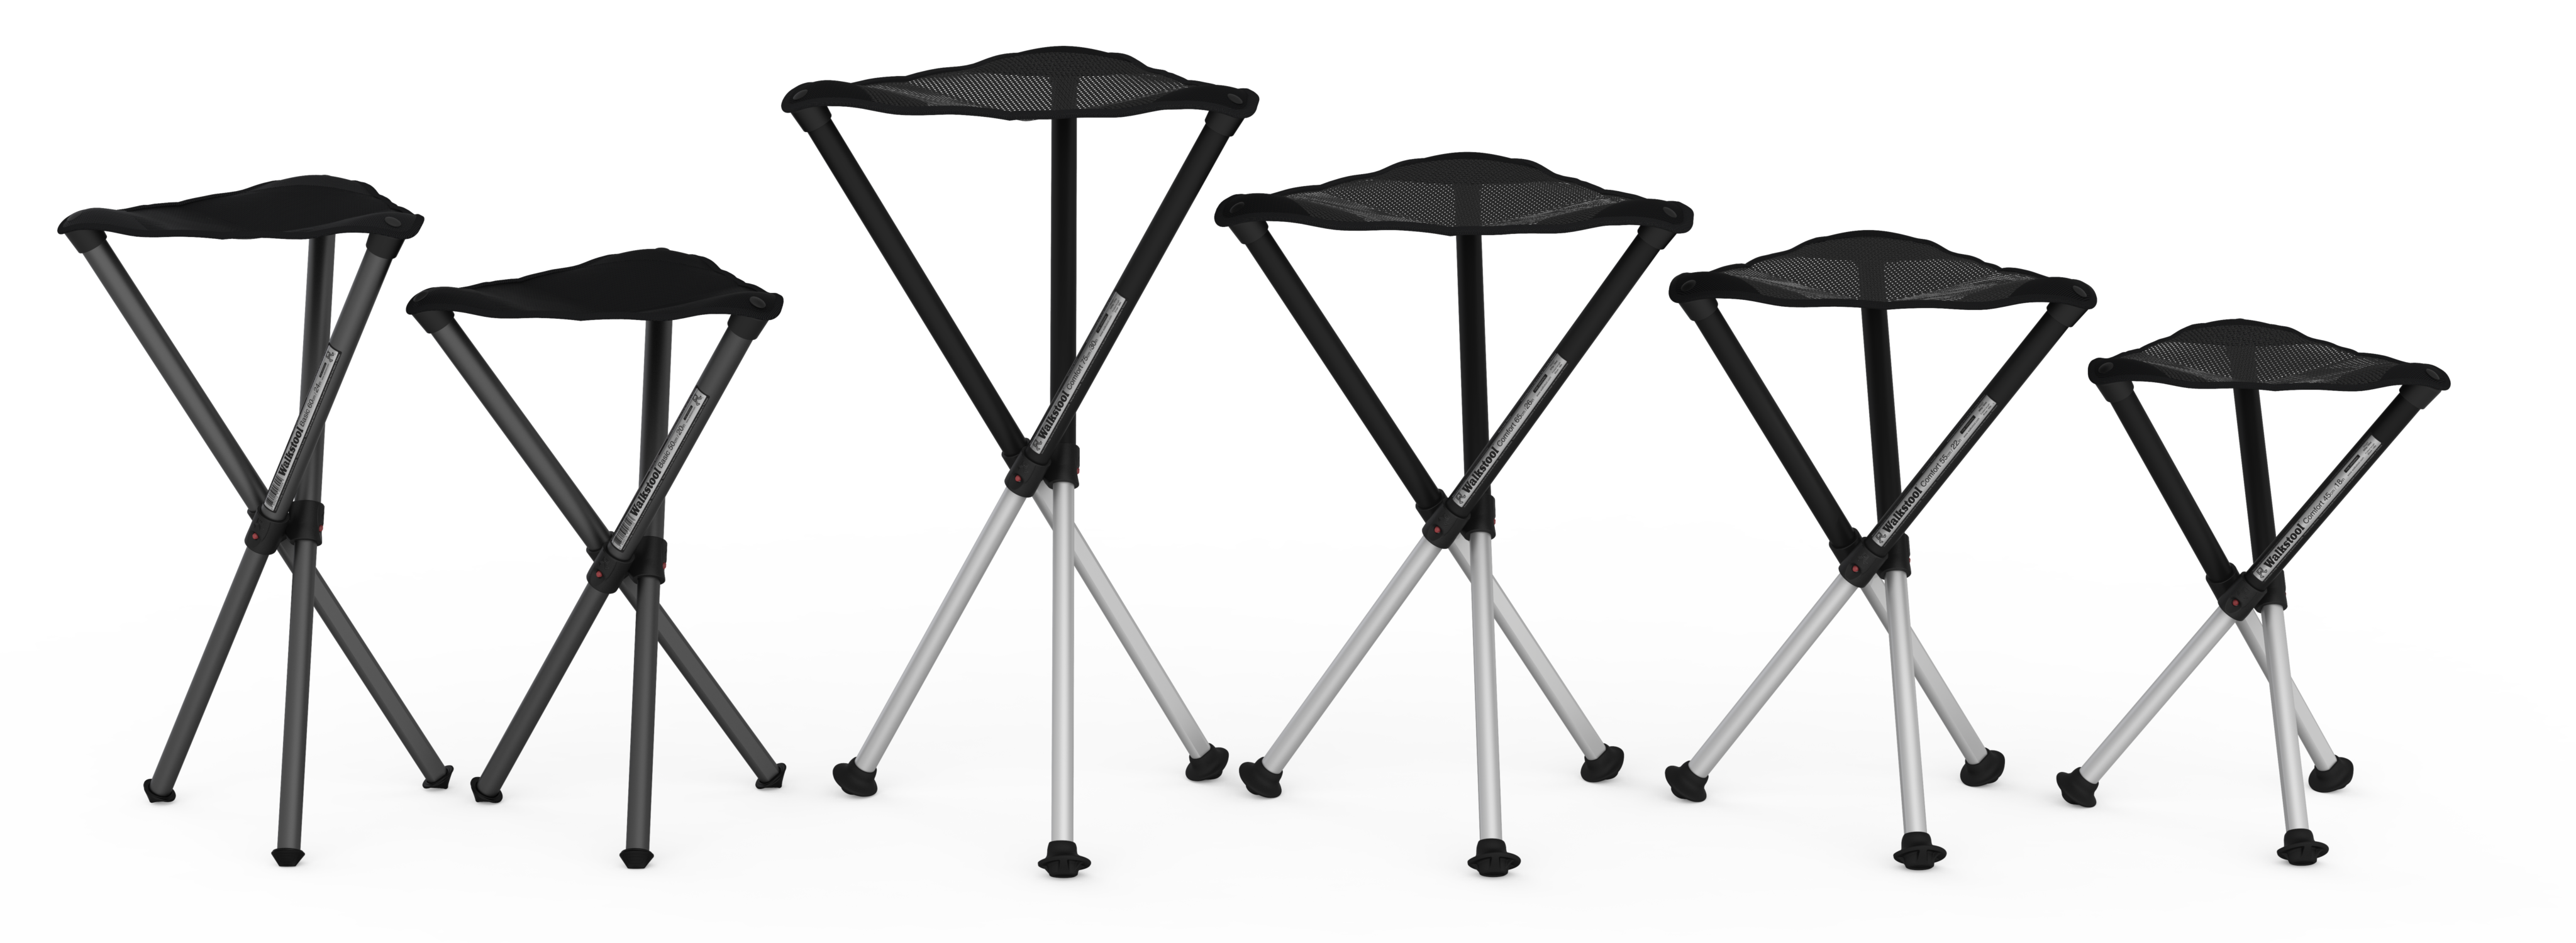 Walkstool Made in Sweden 3 Legged Folding Stool in Aluminium Maximum Load 200 to 250 kg Black and Silver Comfort Model Height 45 to 75 cm 